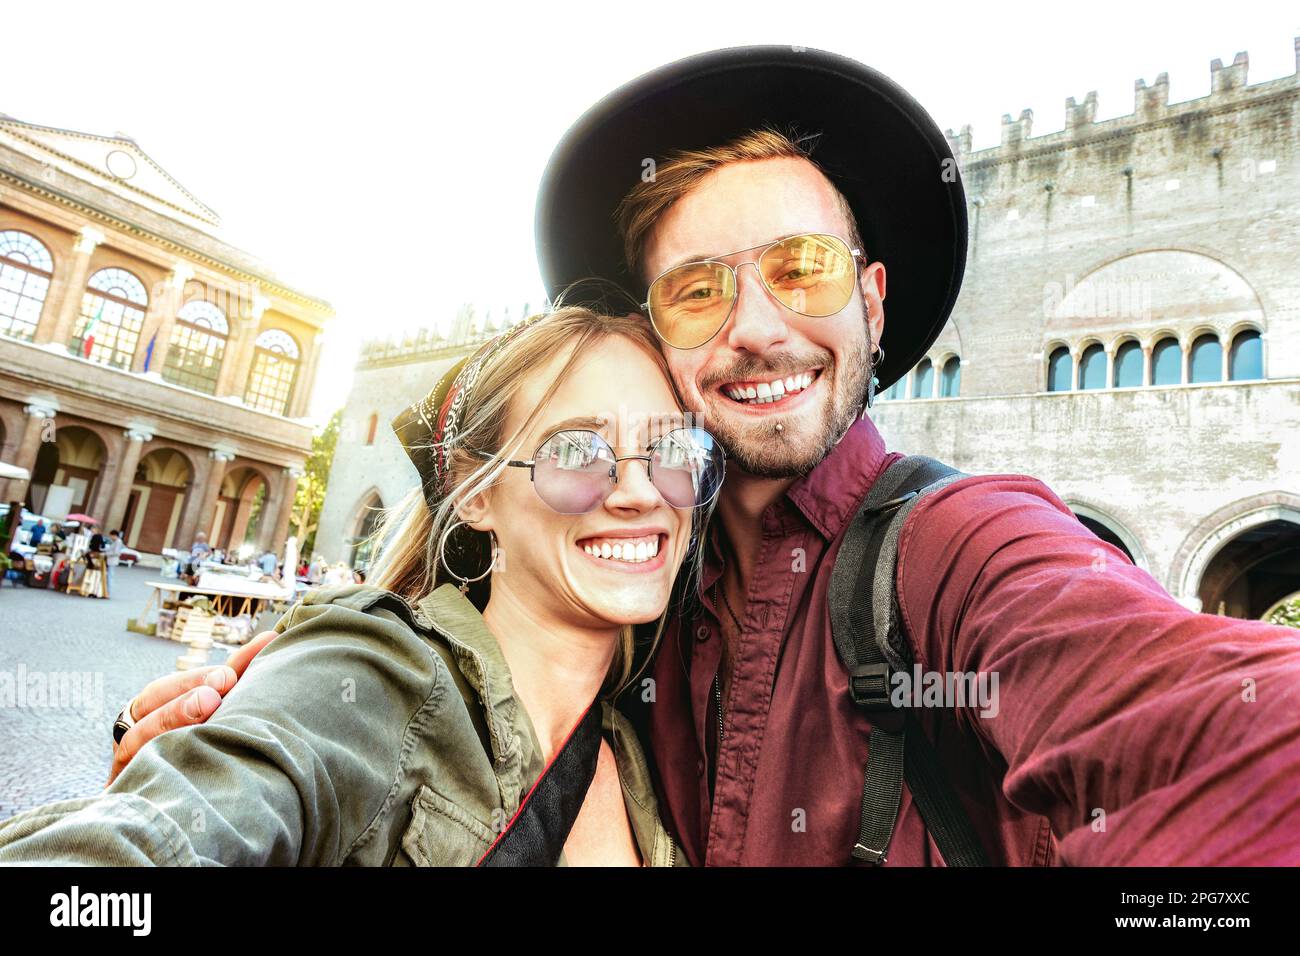 Young man and woman in love having fun taking selfie at old town tour - Wanderlust life style travel concept with lovely tourist couple on city sights Stock Photo